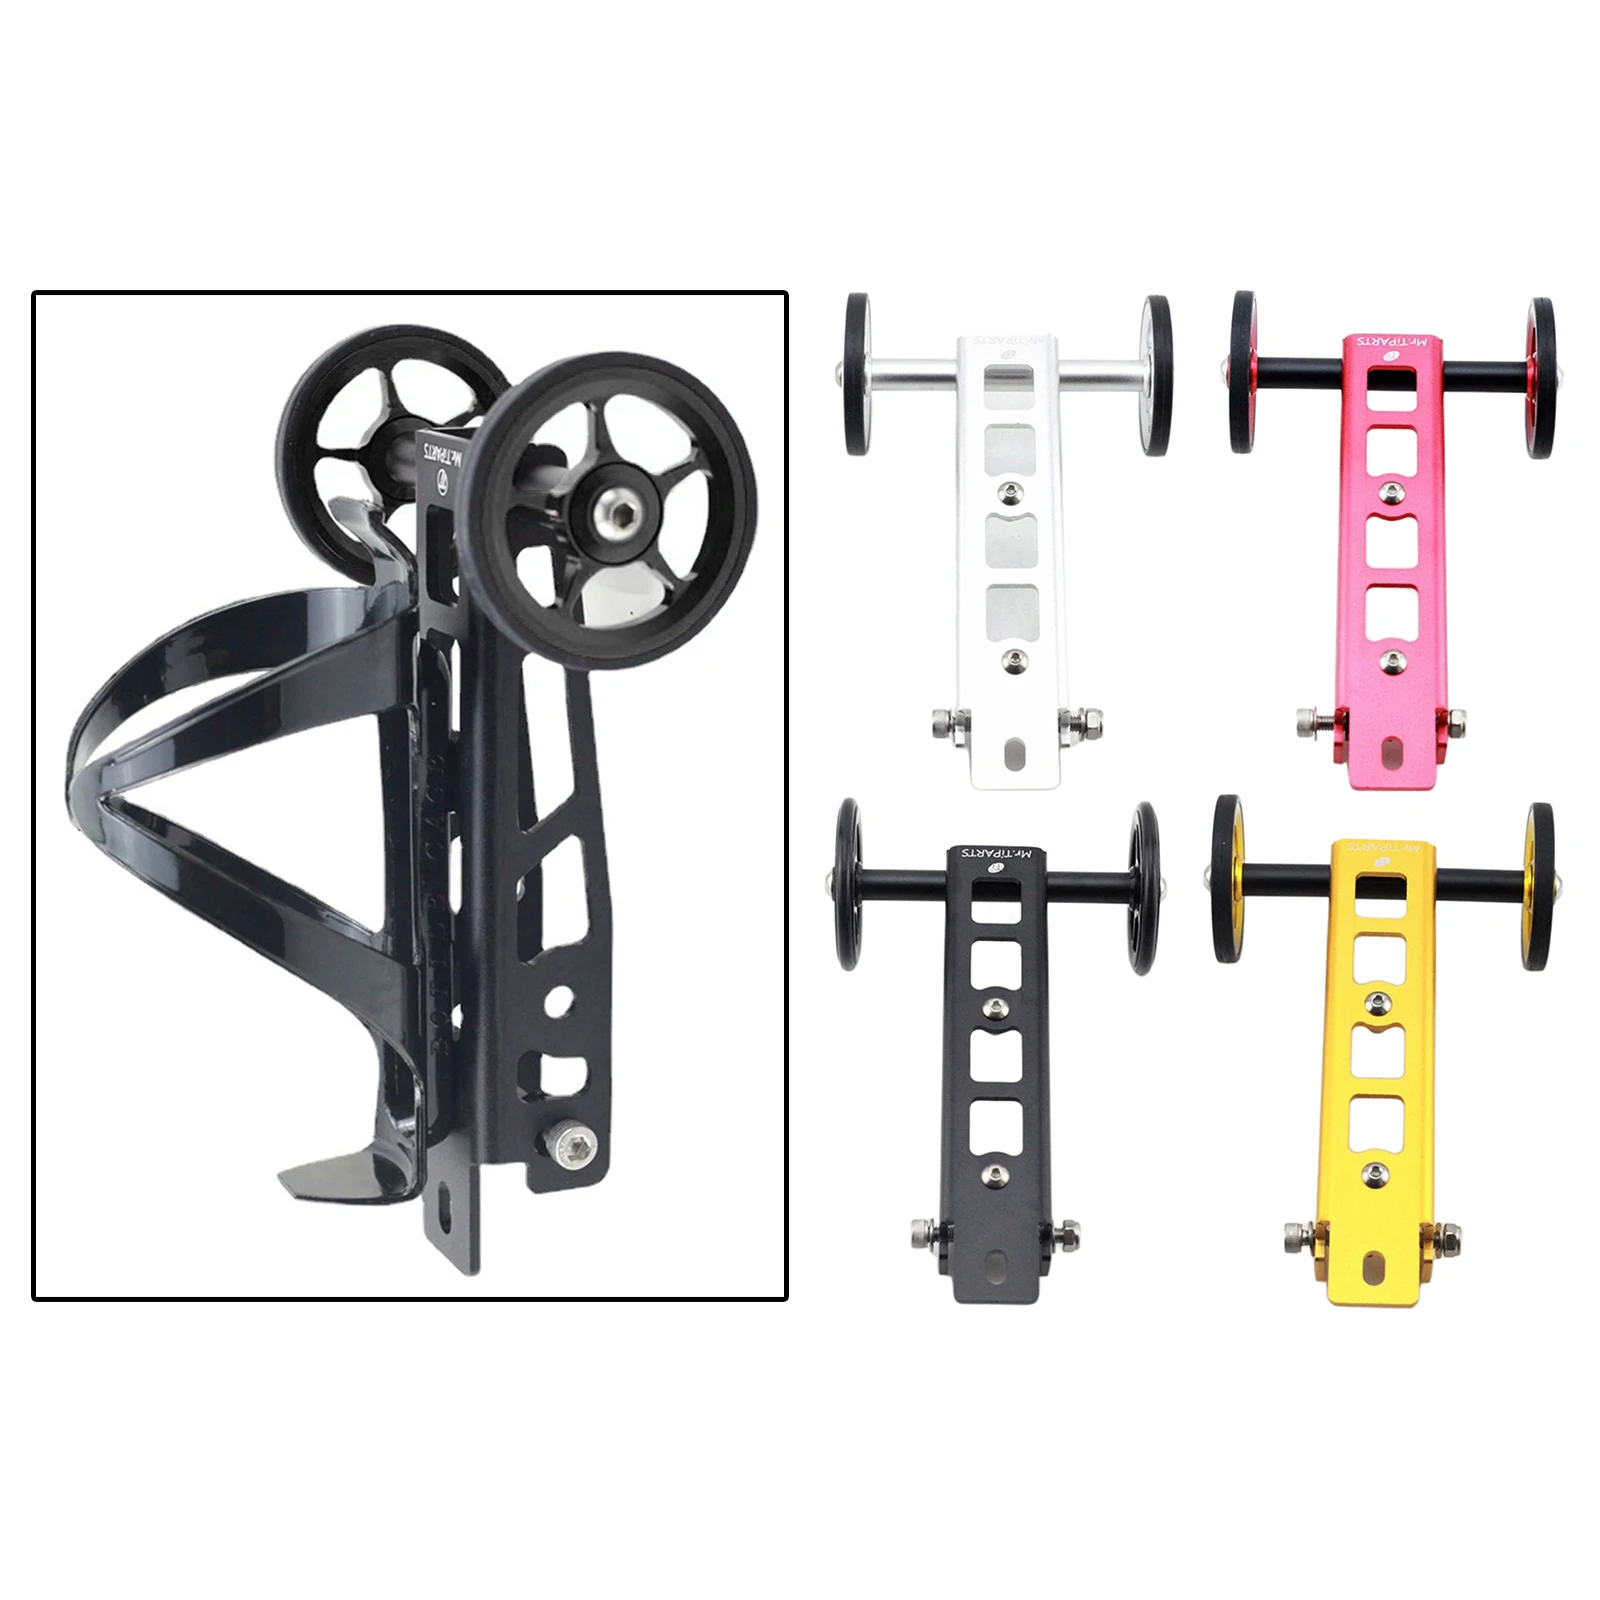 

Bike easywheel high strength alloy push easy wheels for BIRDY folding bike stand and water bottle cage holder